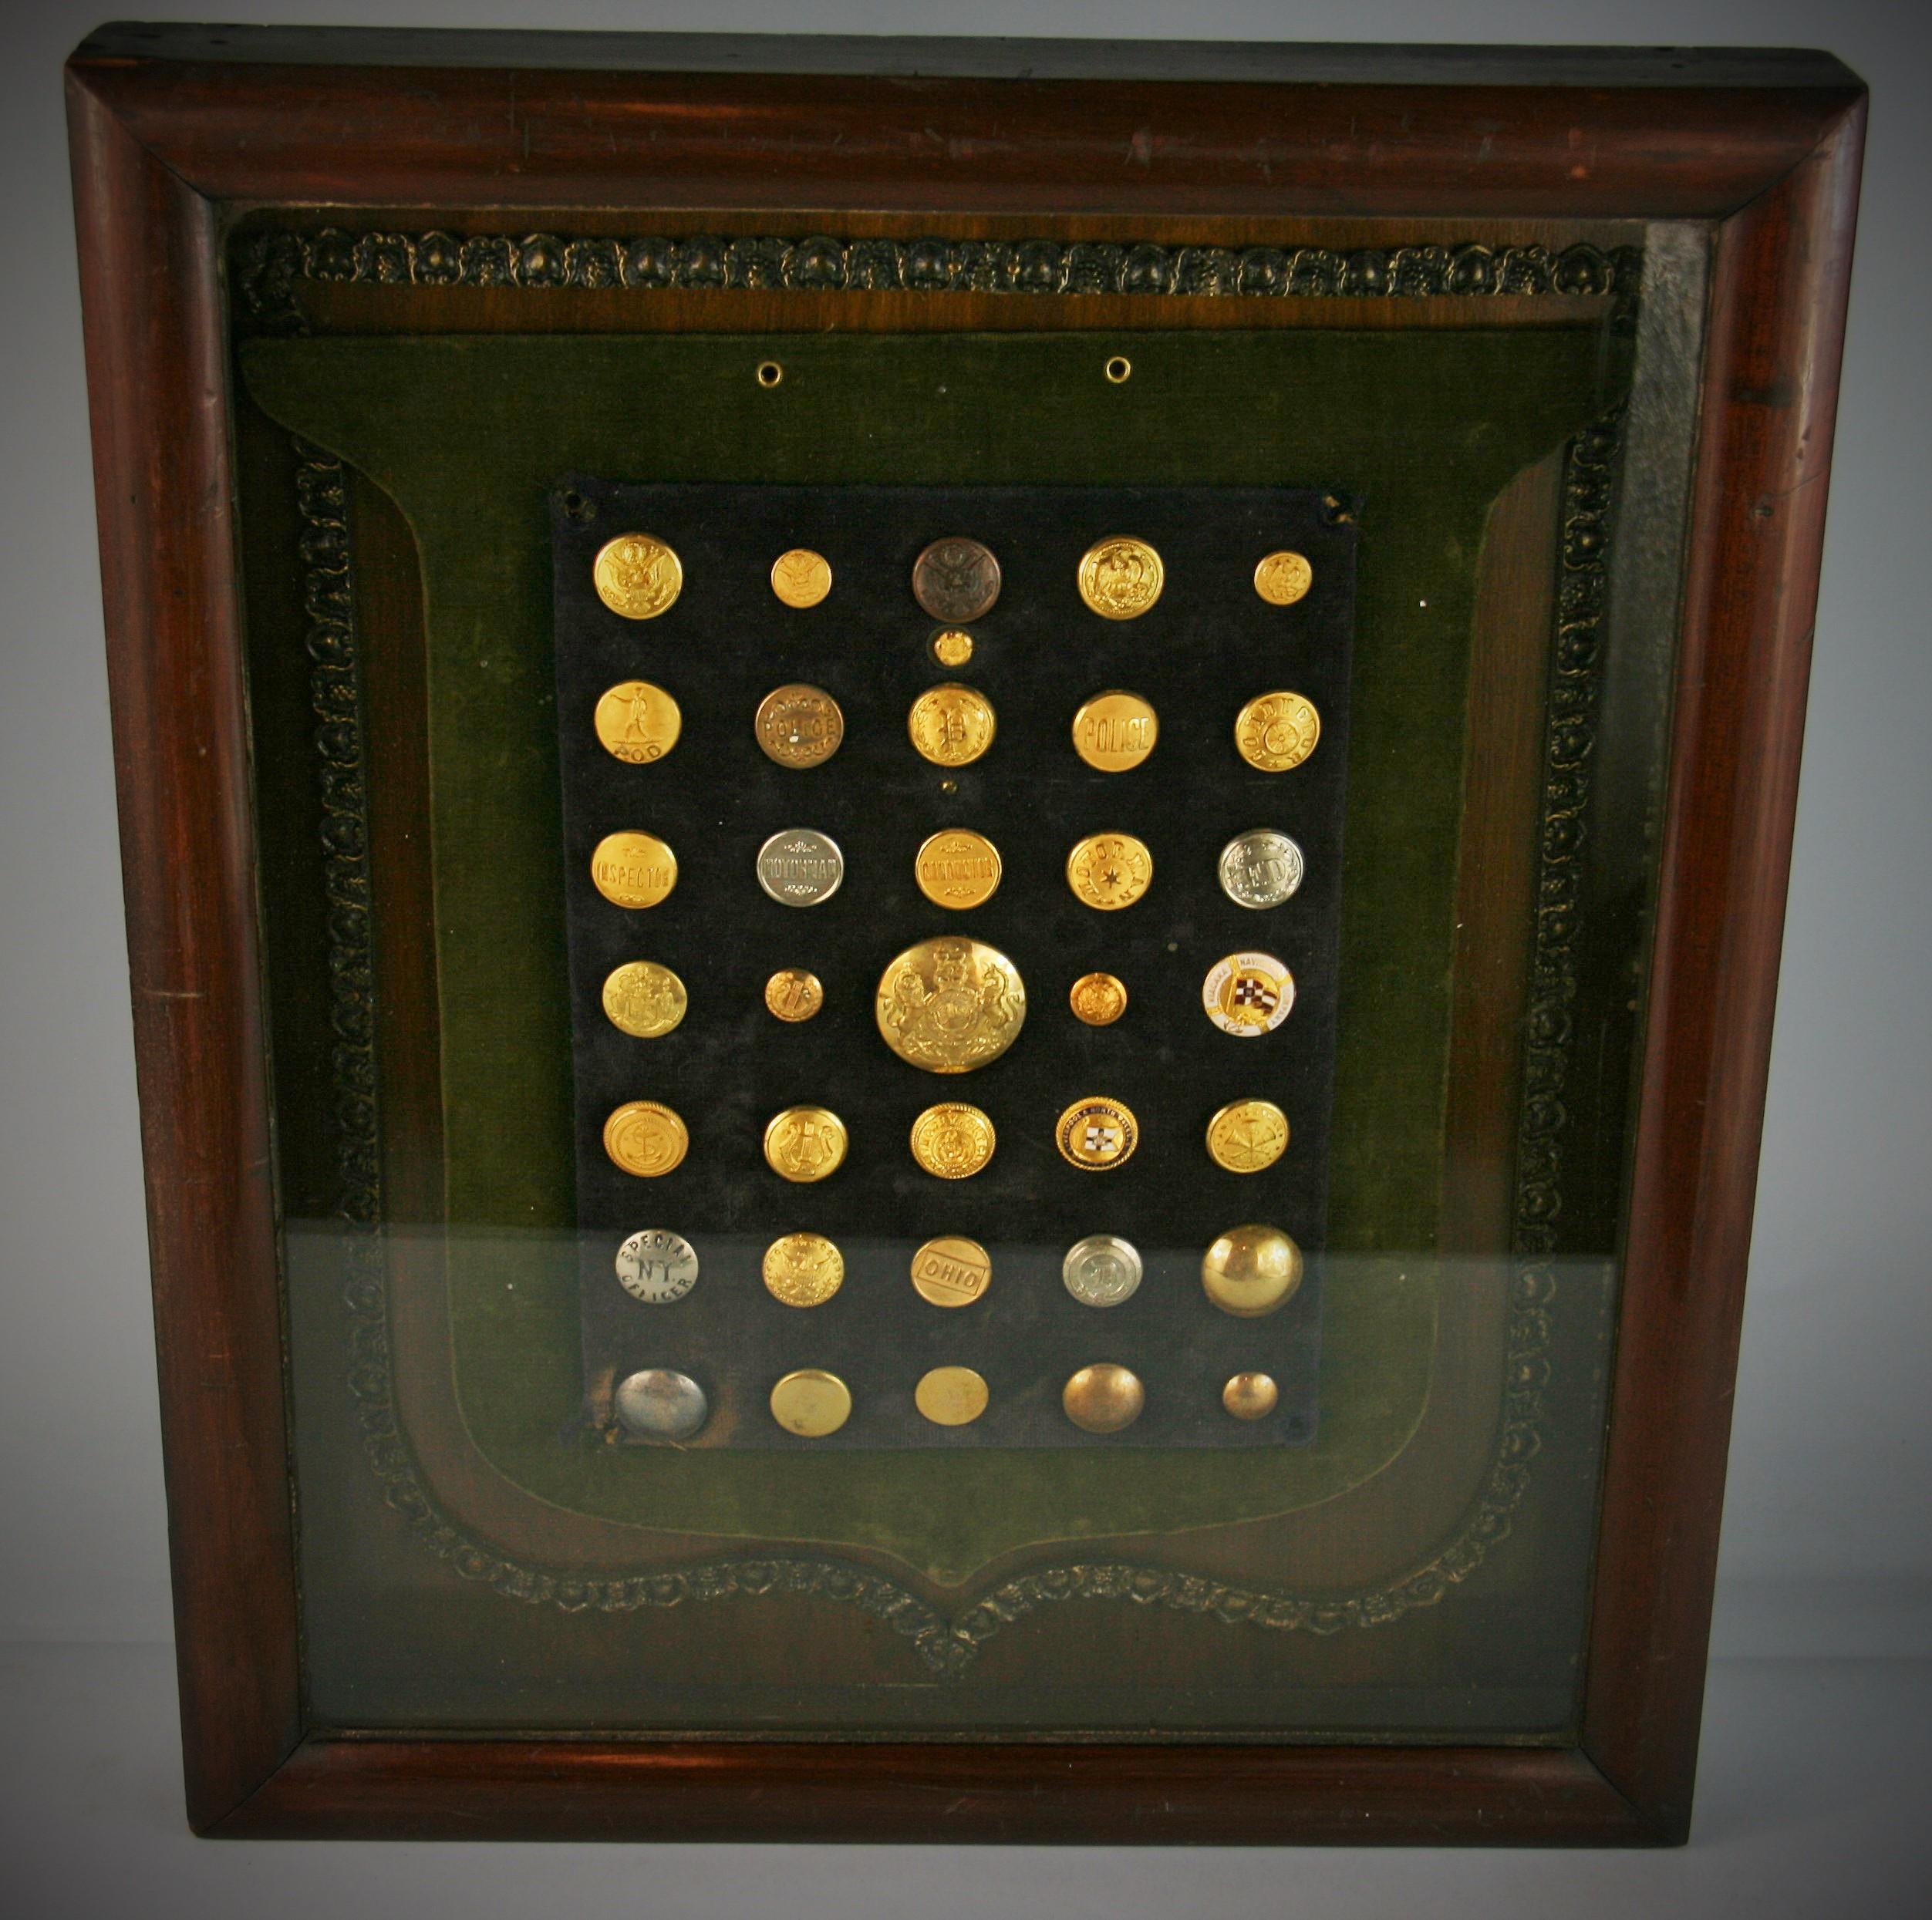 3-642 brass and silver button collection encased in a wood frame set on a green velvet board.